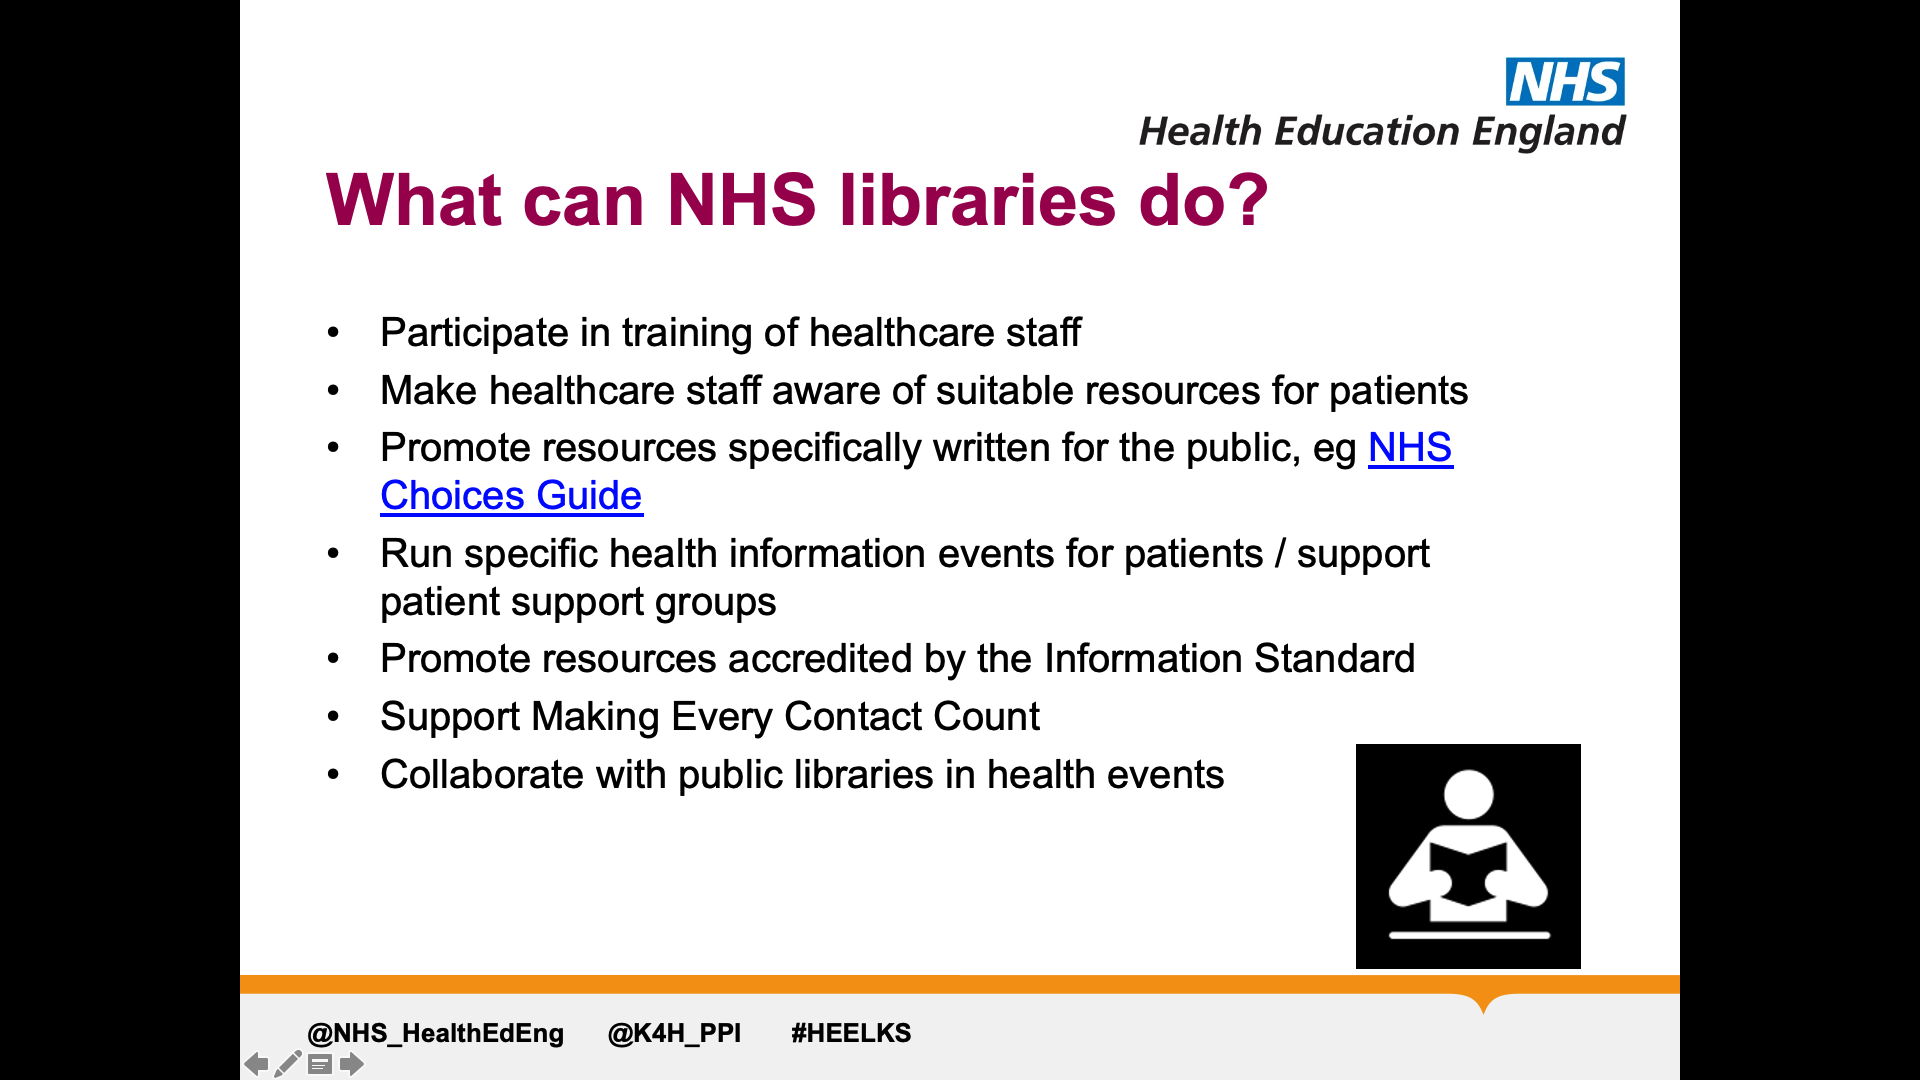 Text on page: What can NHS Libraries do? : 1. Participate in training of healthcare staff 2. Make healthcare staff aware of suitable resources for patients 3. Promote resources specifically written for the public, eg NHS Choices Guide 4. Run specific health information events for patients / support patient support groups 5. Promote resources accredited by the Information Standard 6. Support Making Every Contact Count 7. Collaborate with public libraries in health events